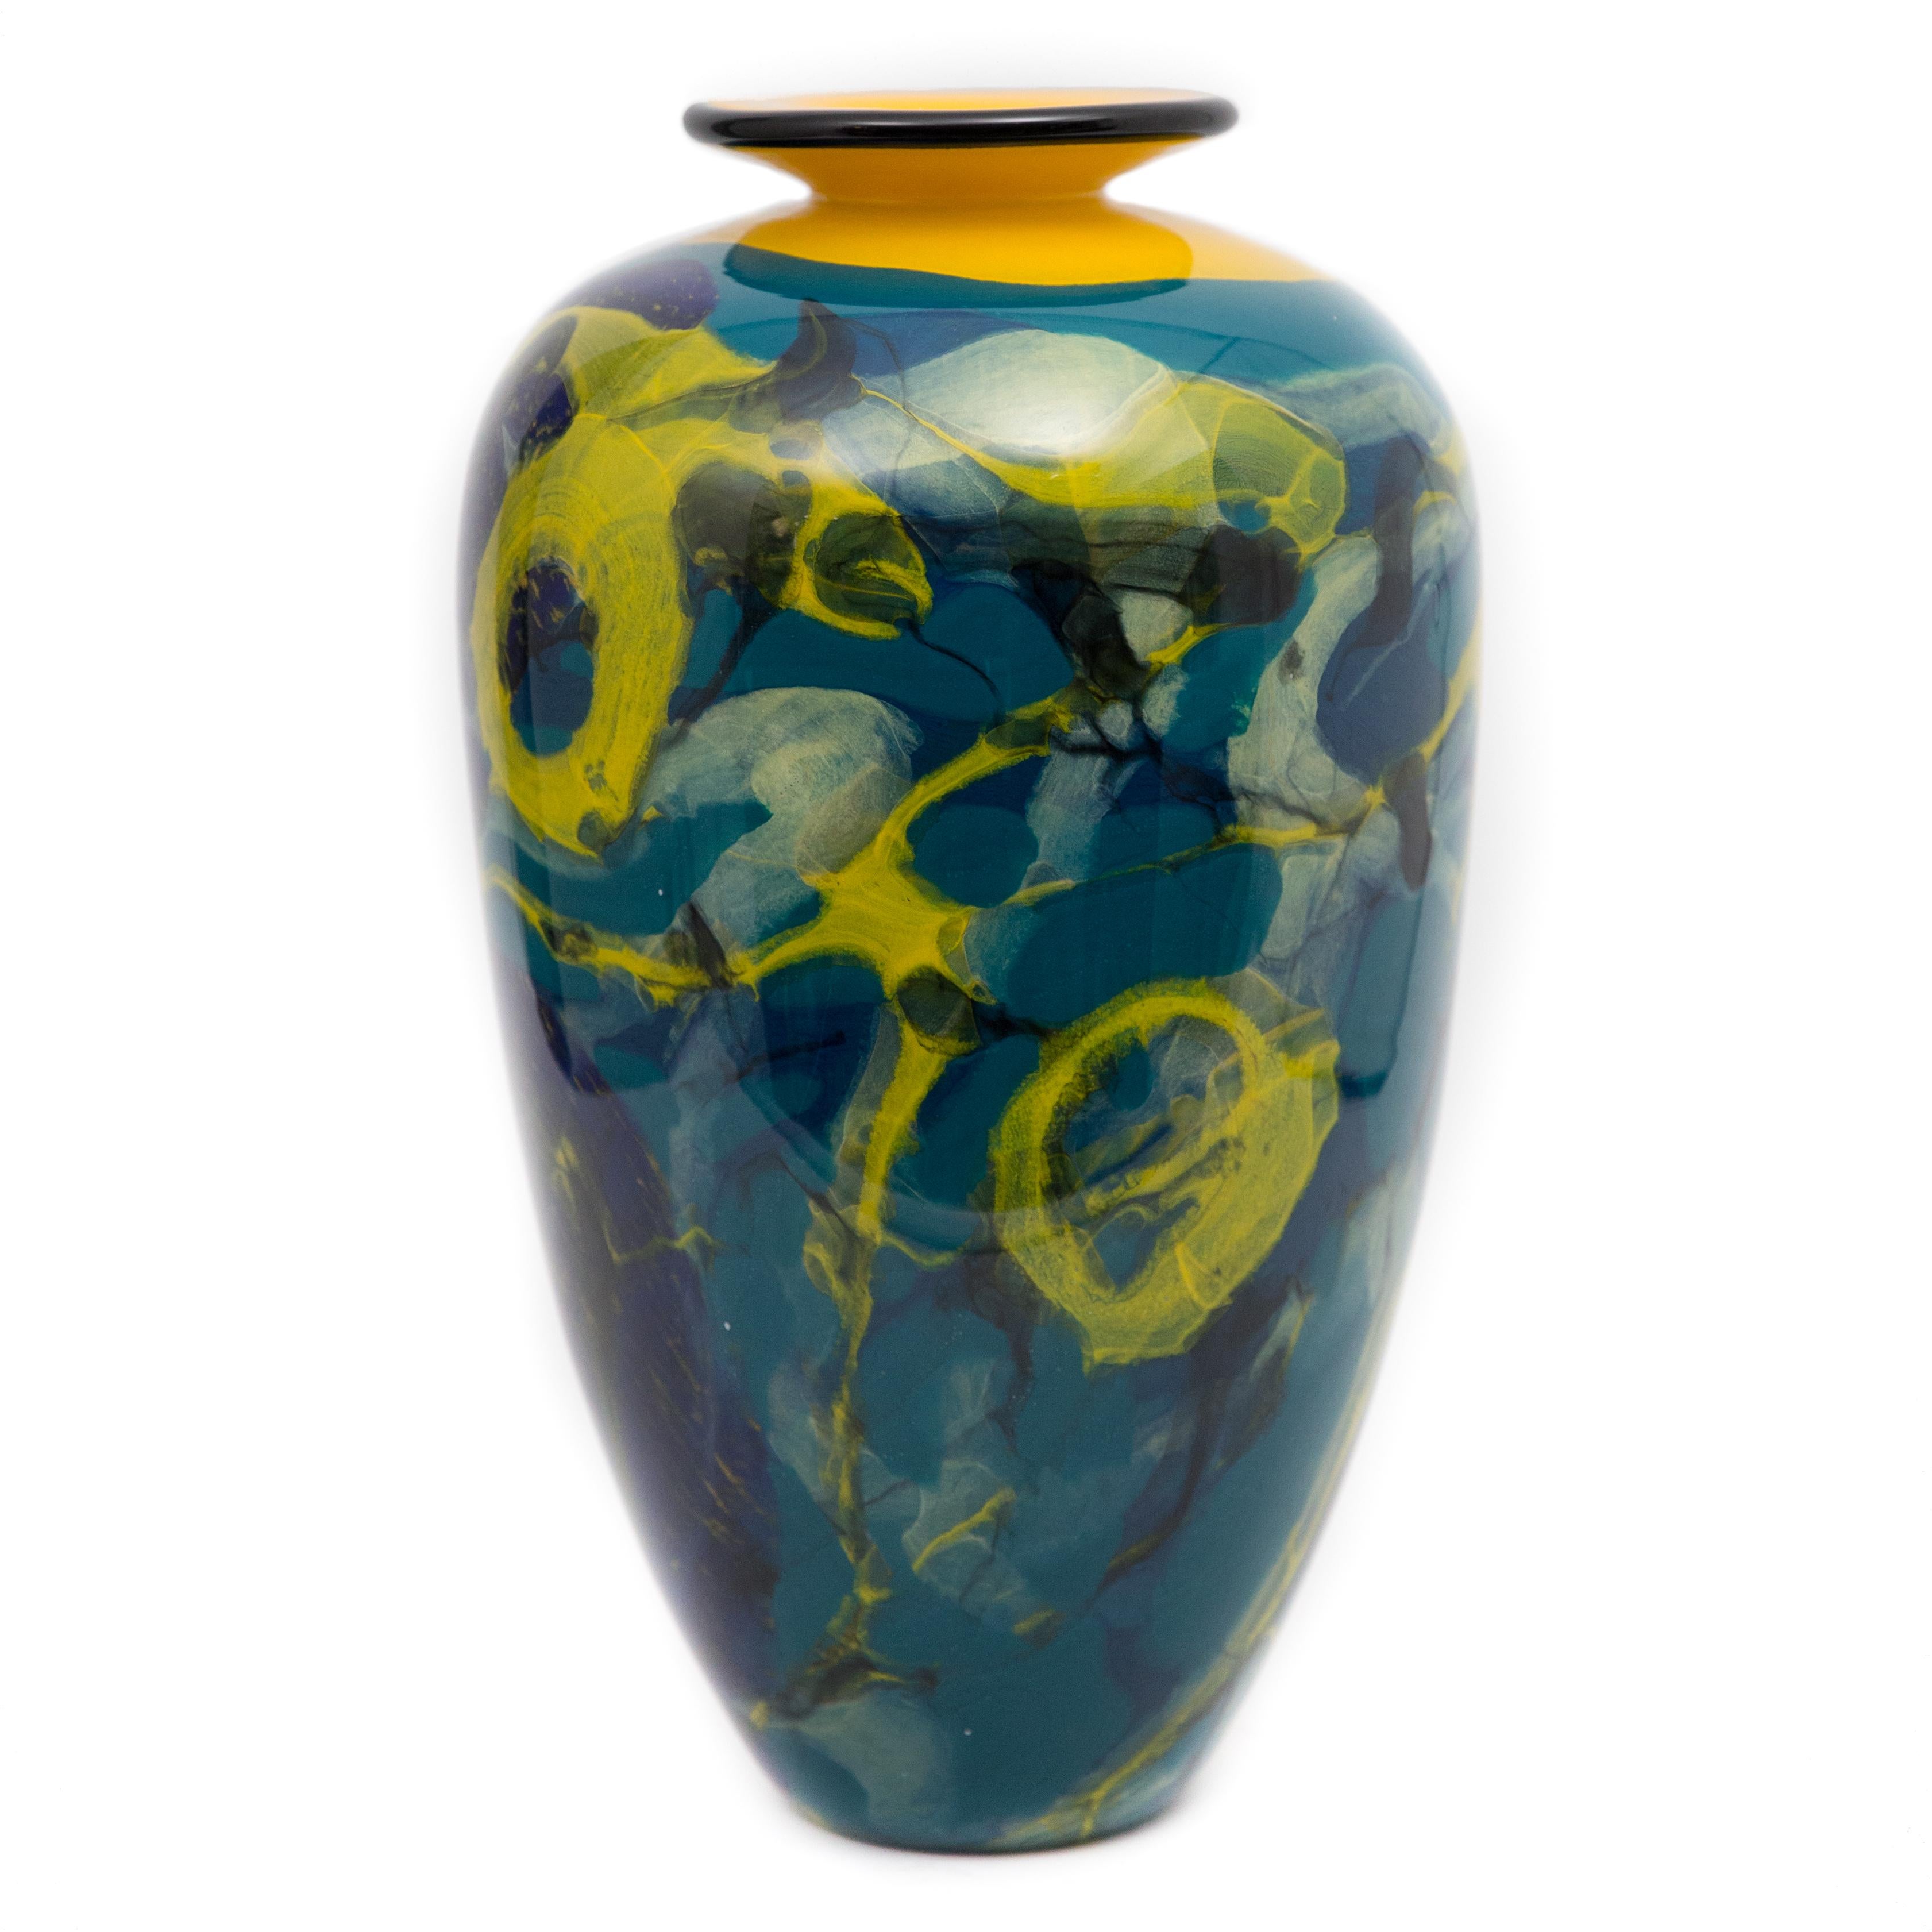 This vase is a vibrant red yellow and blue work that was created by Ioan Nemtoi. The artist signed the vase. The vase has a black rim, yellow and red throughout, on a blue ground. Born in Romania in 1964 he attended the Academy at Bucharest, his